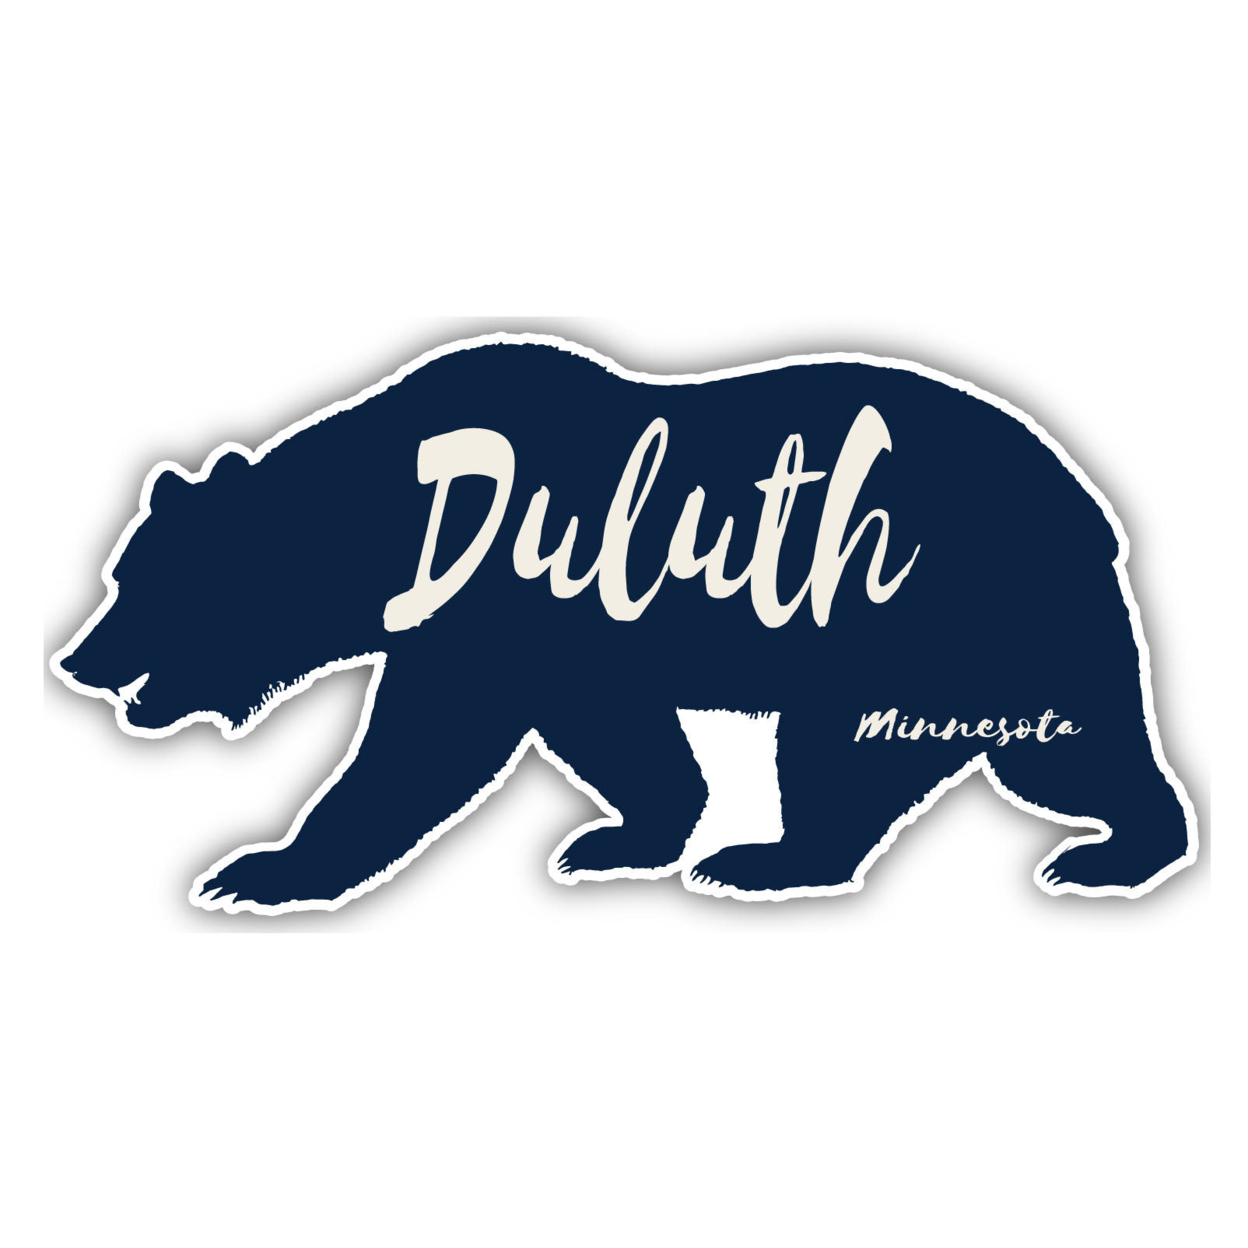 Duluth Minnesota Souvenir Decorative Stickers (Choose Theme And Size) - 4-Pack, 8-Inch, Tent